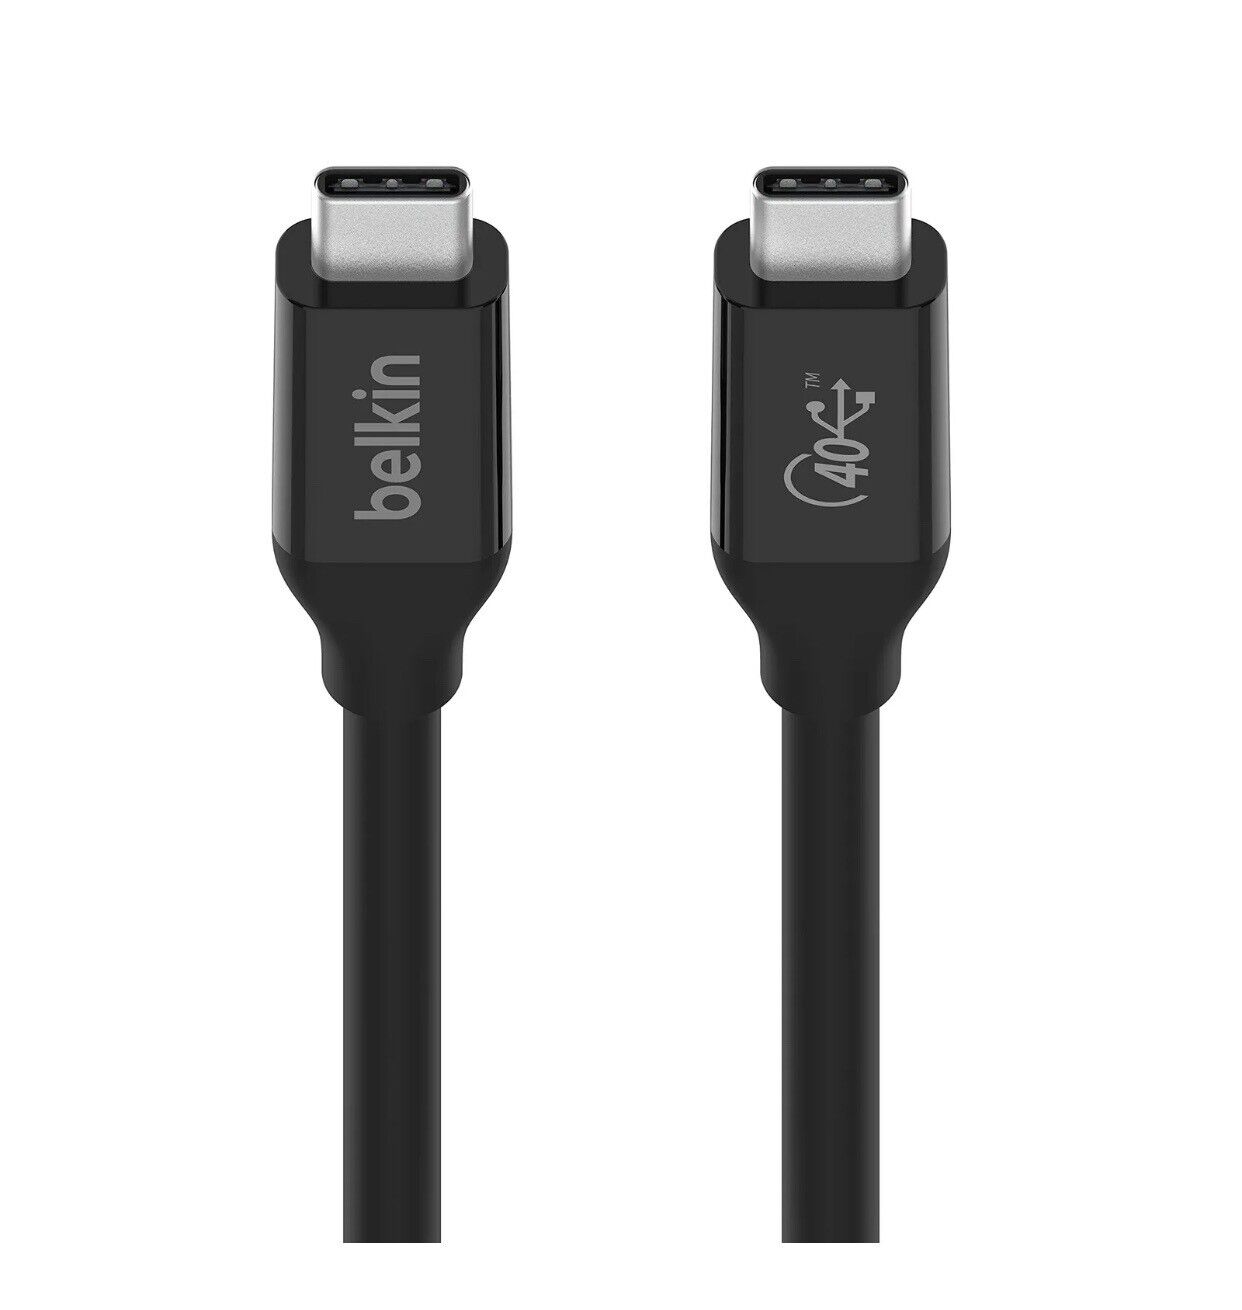 Belkin USB4 USB C to USB C Cable 2.6ft (USB IF Certified with Power Delivery up 